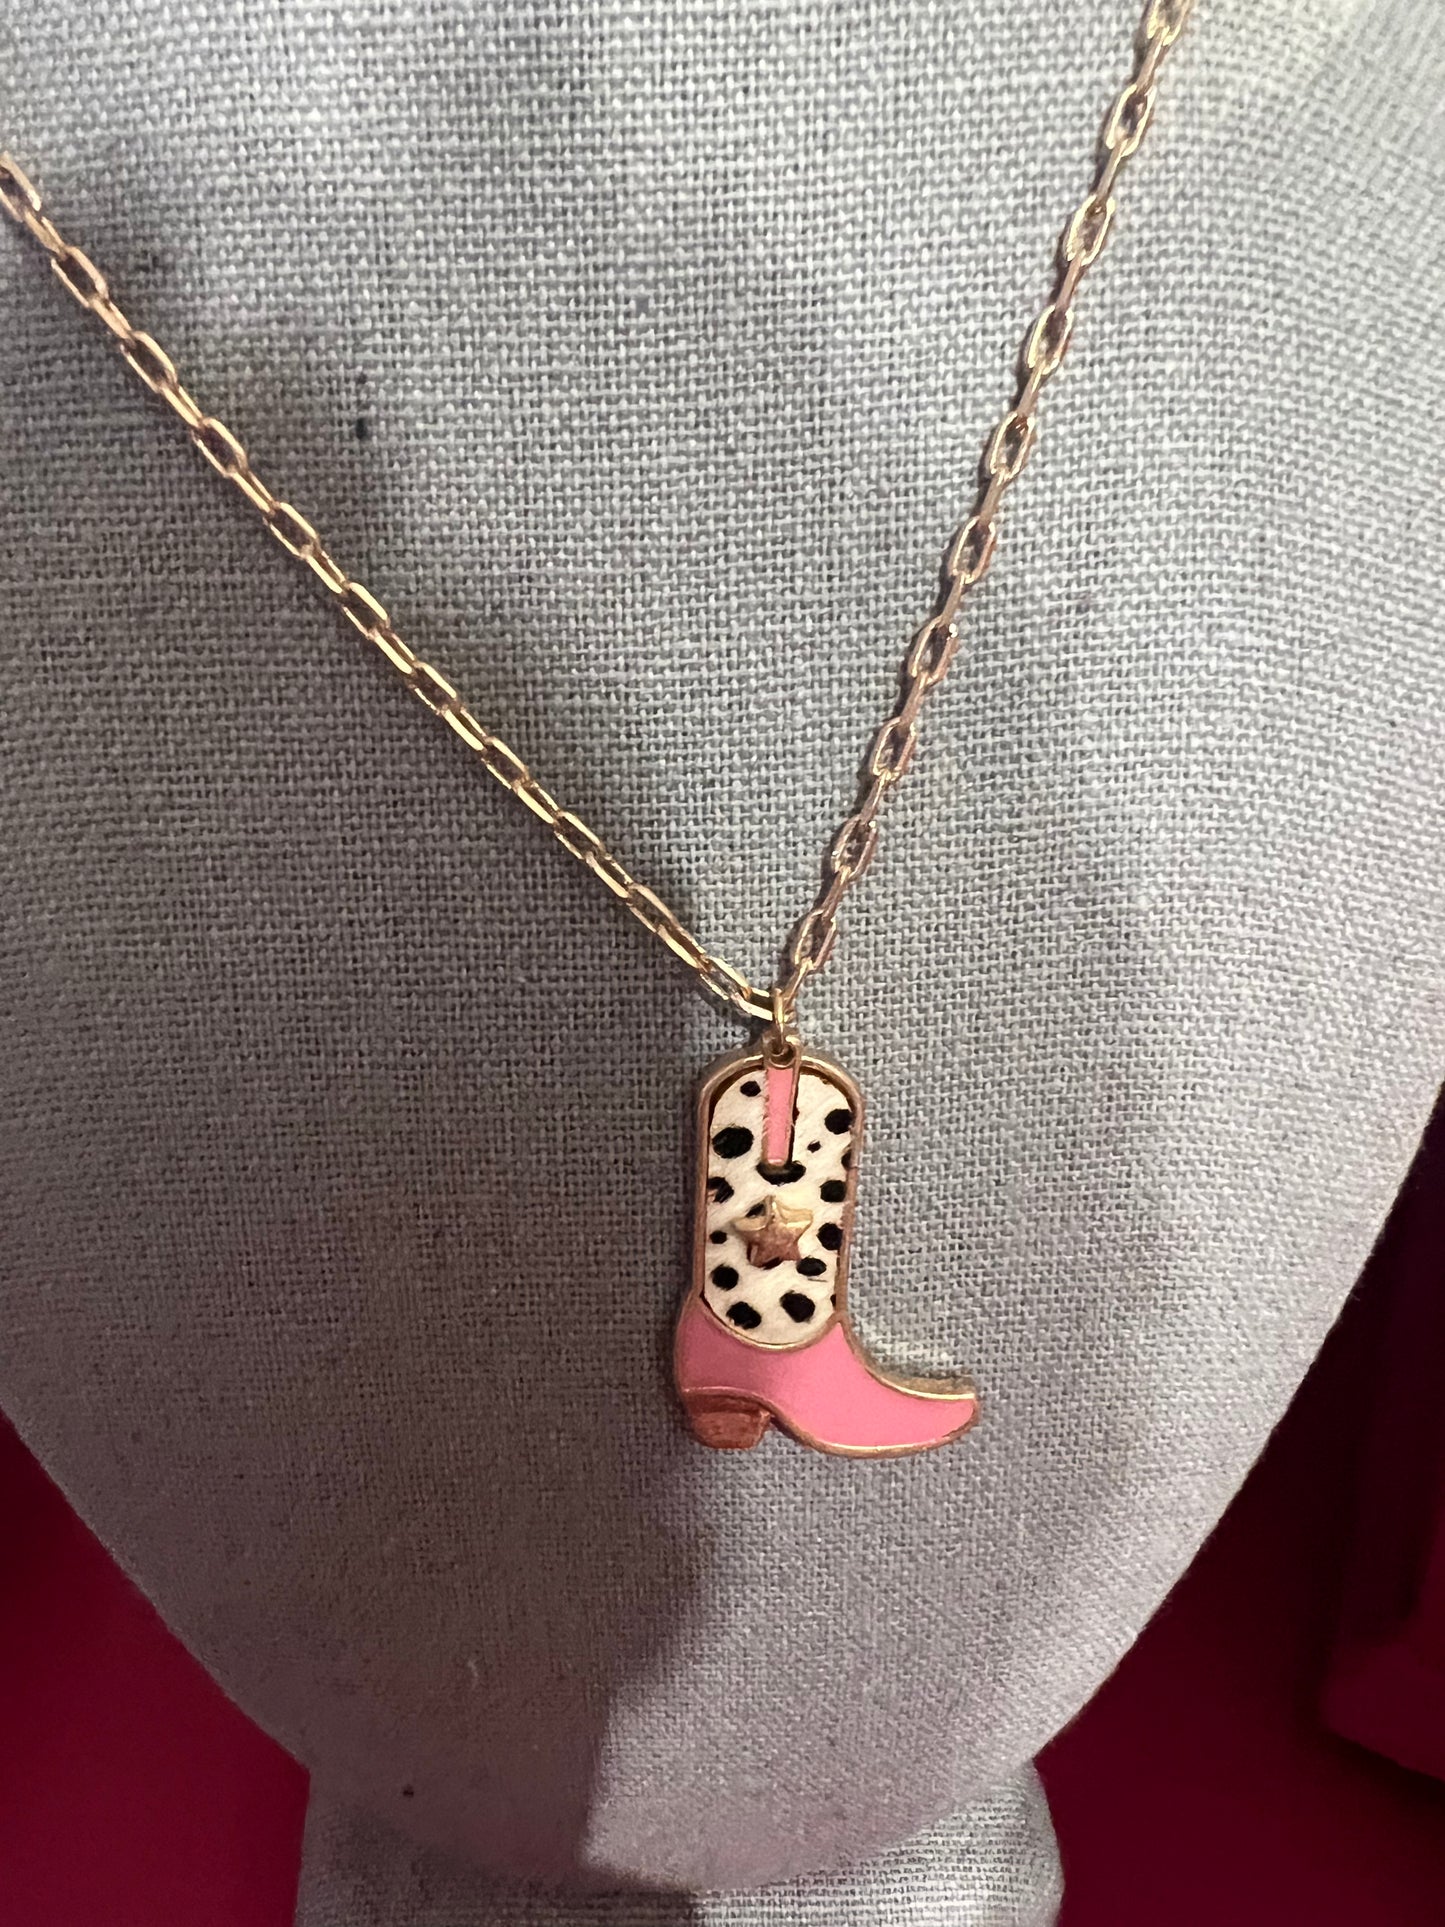 Boot necklace